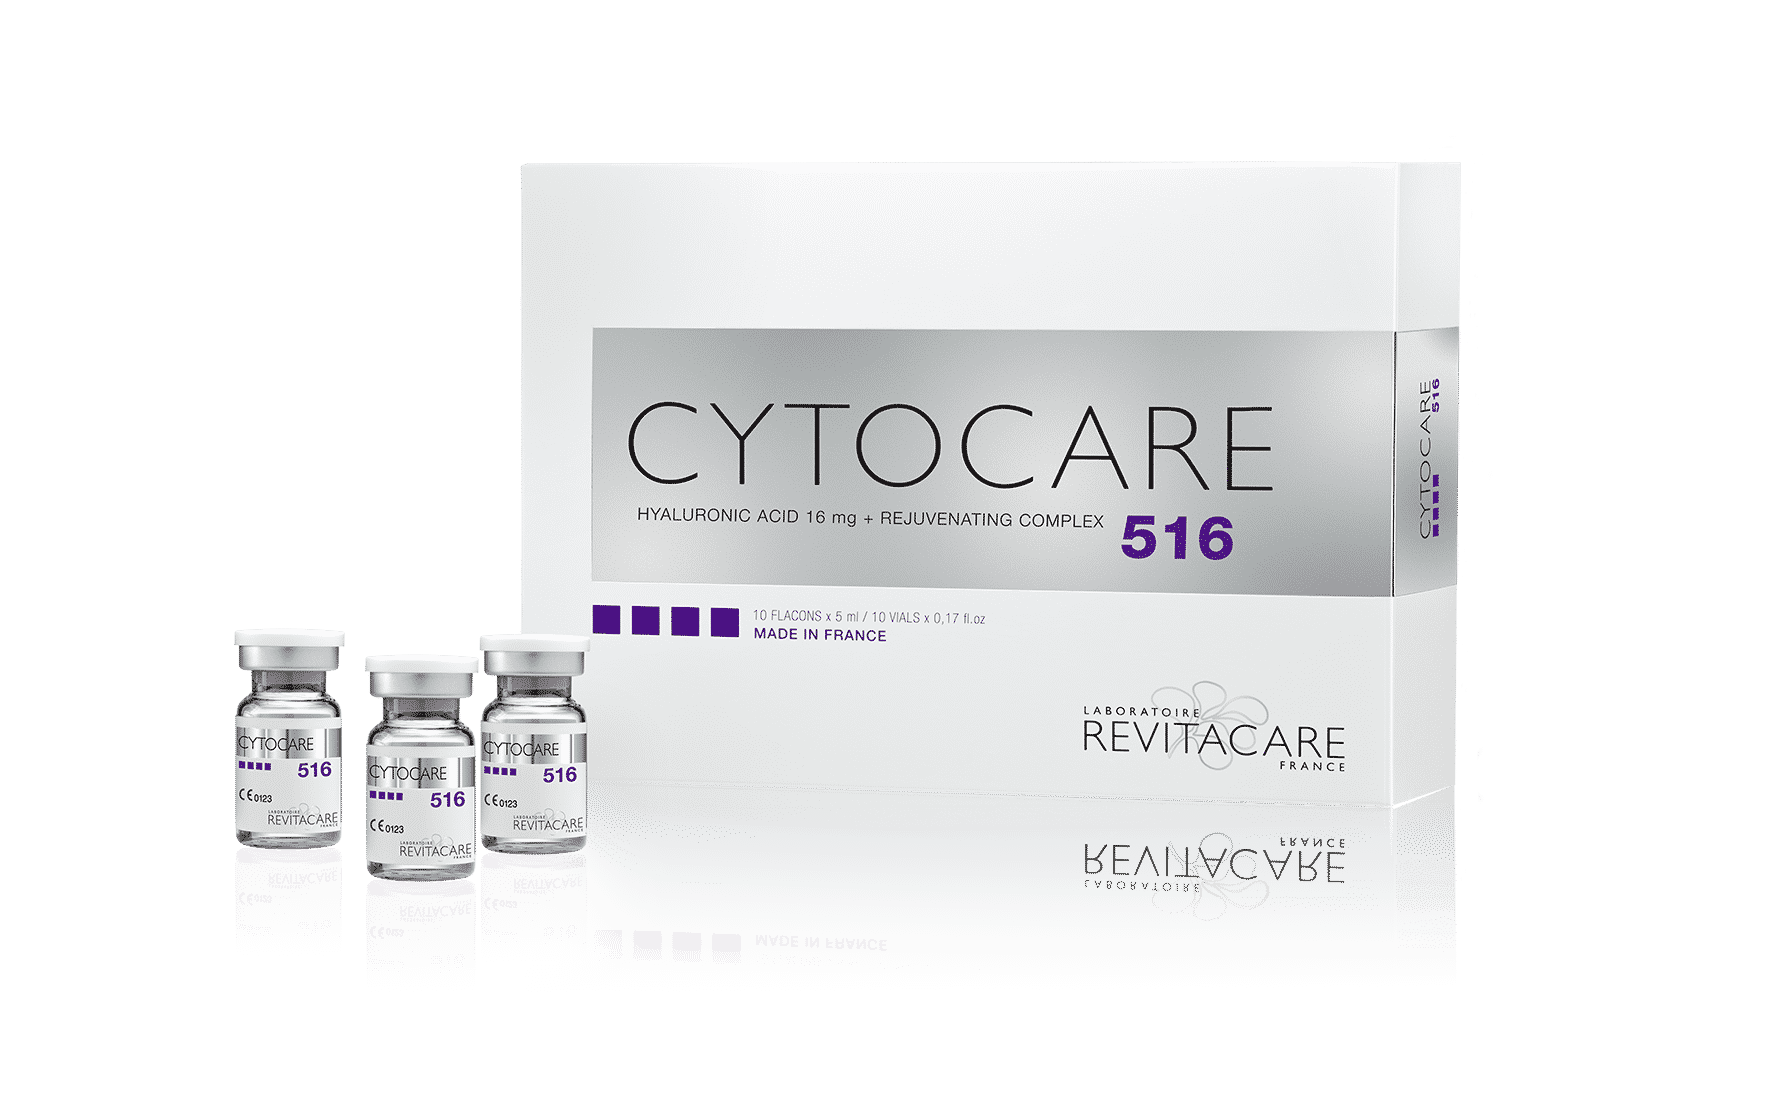 CYTOCARE 516 hyaluronic acid and rejuvenating complex